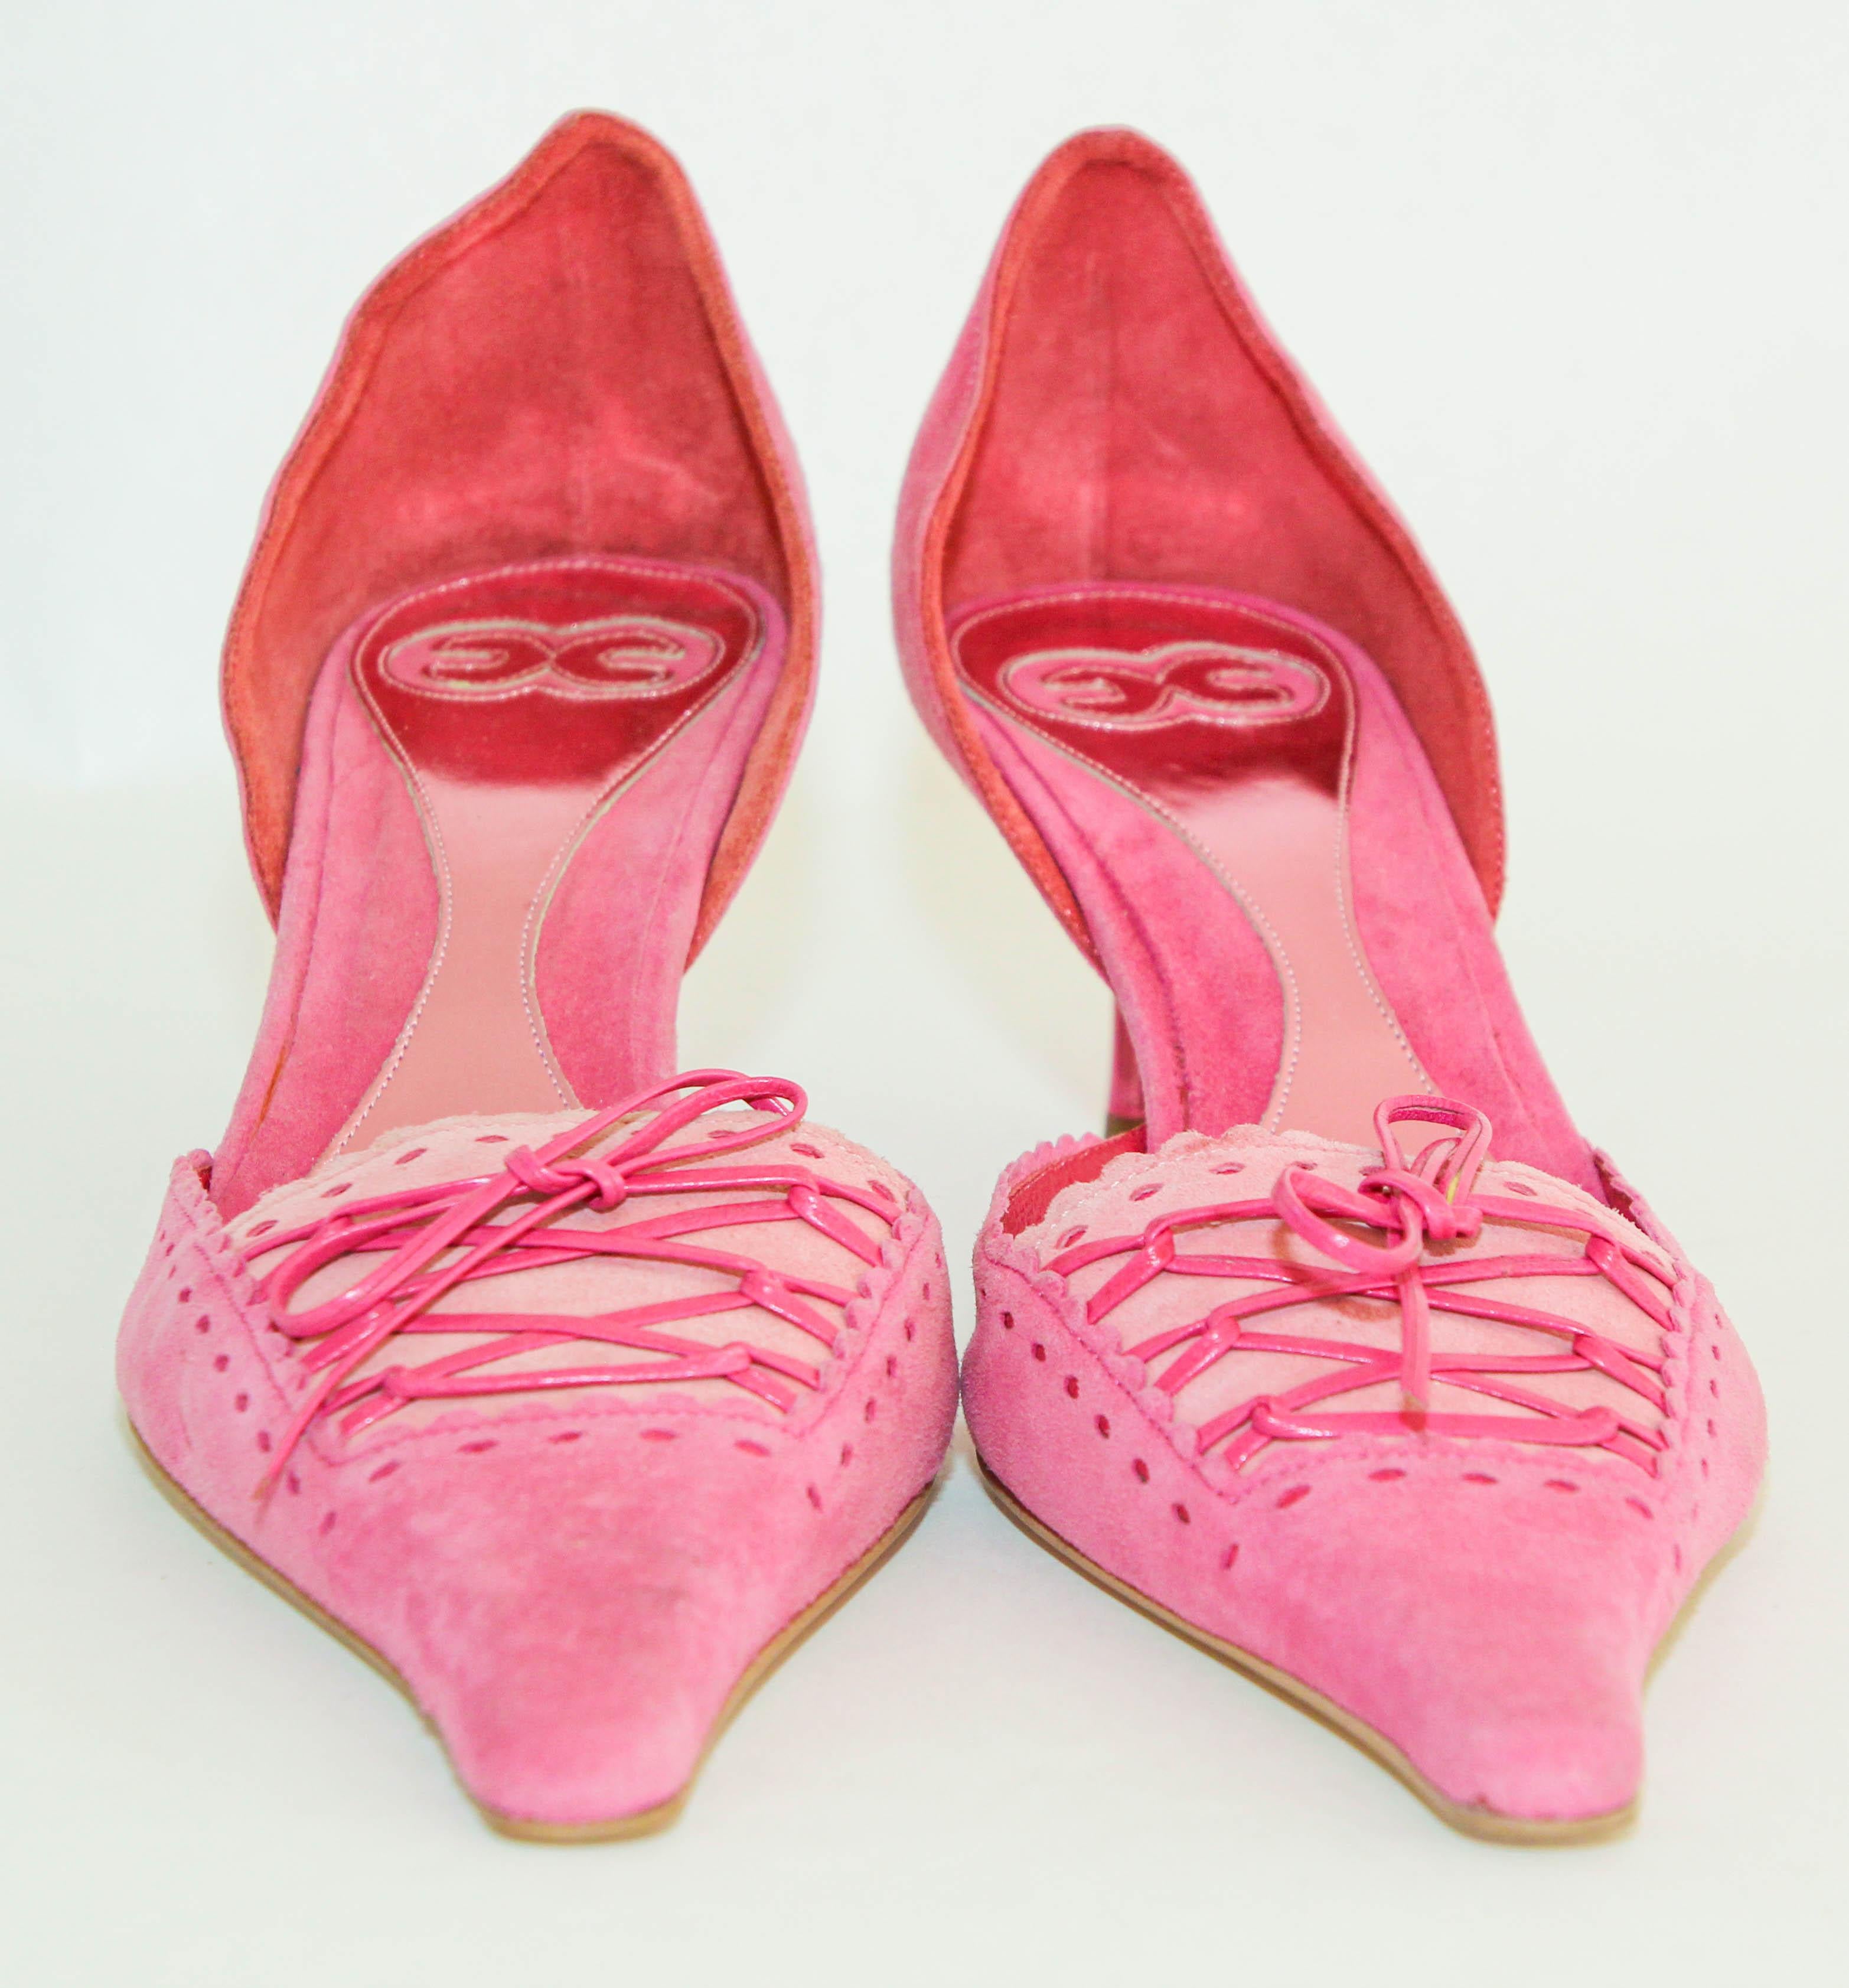 Escada Hot Pink Suede Pumps with Leather Details Size 36.5 Italy 8